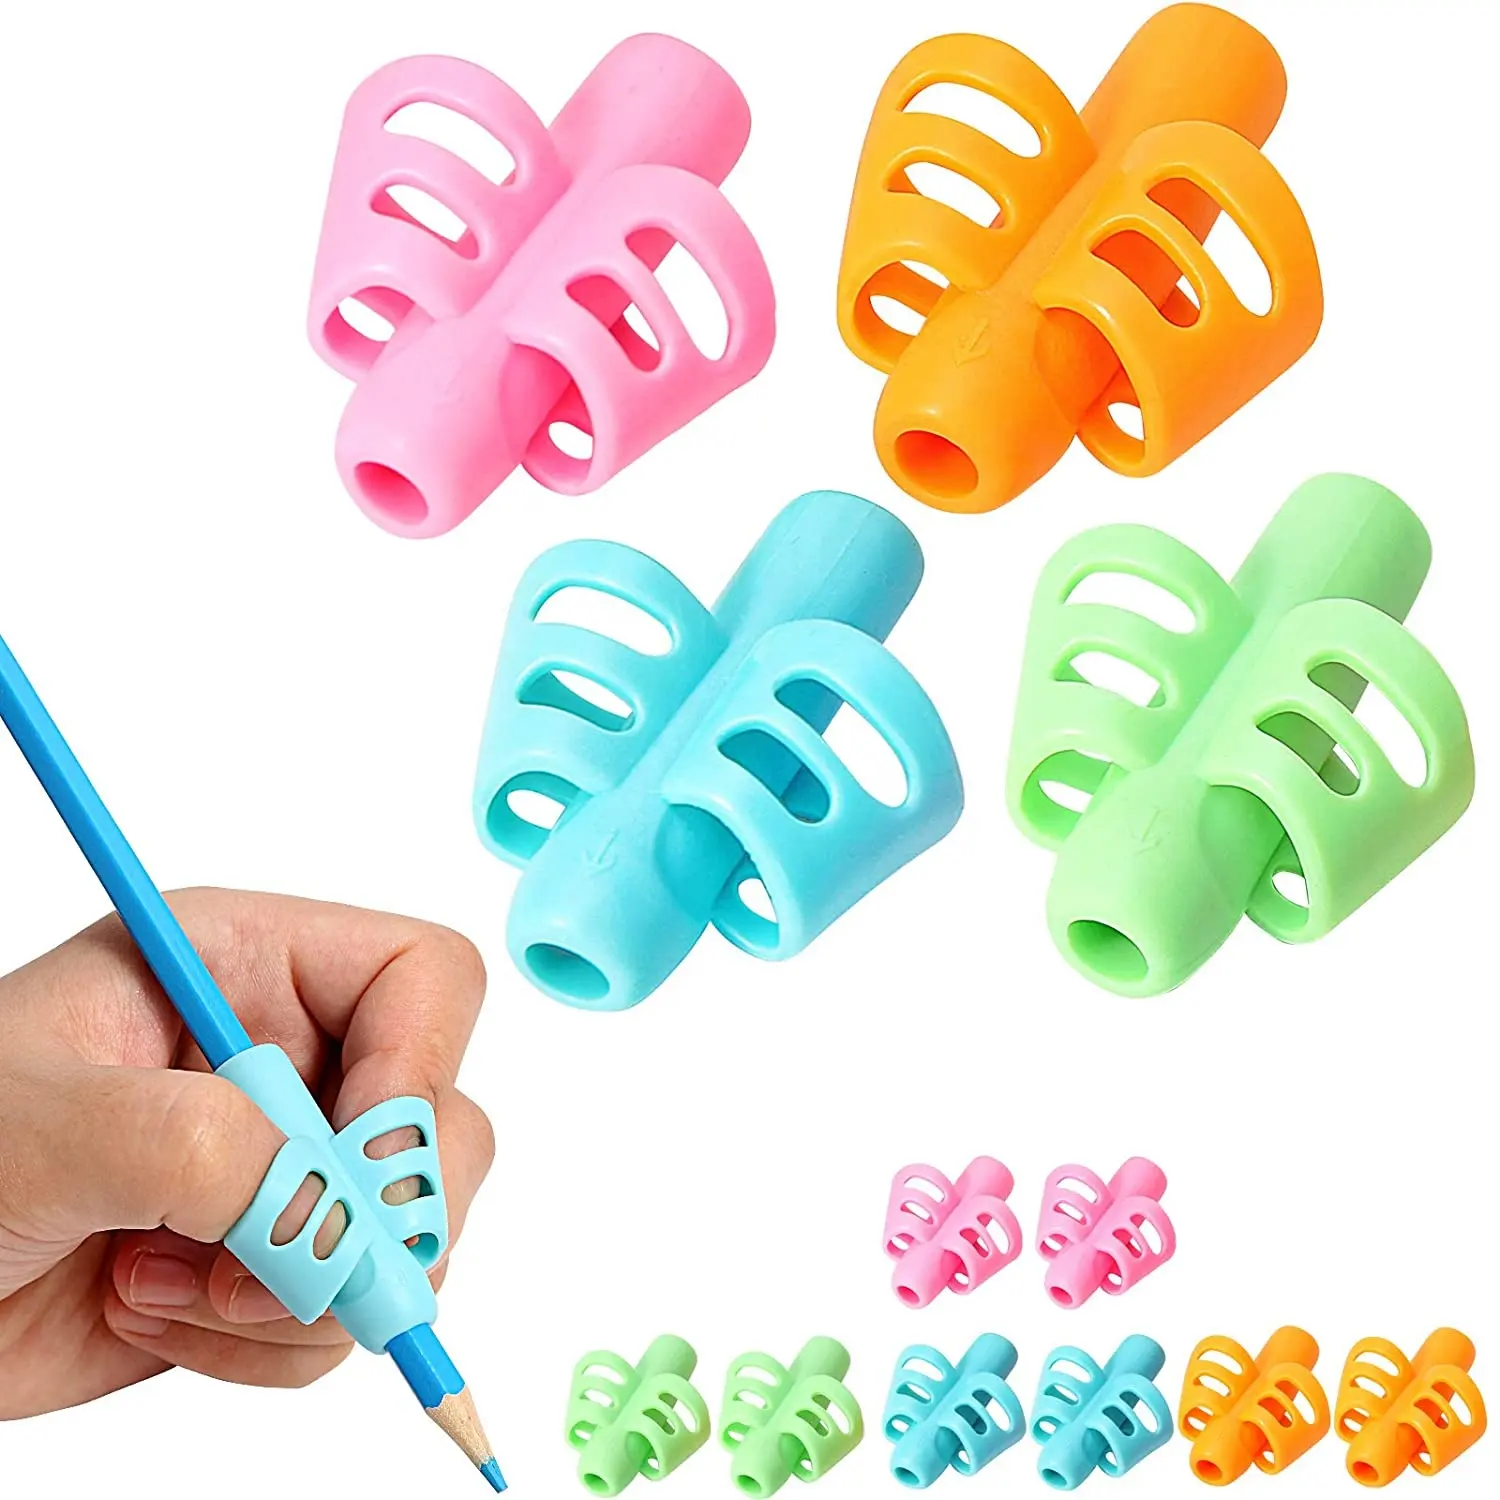 Pen Grips for Kids Handwriting for Preschool,Silicone Pen Holder Pen Writing Aid Grip School Supplies for Kids